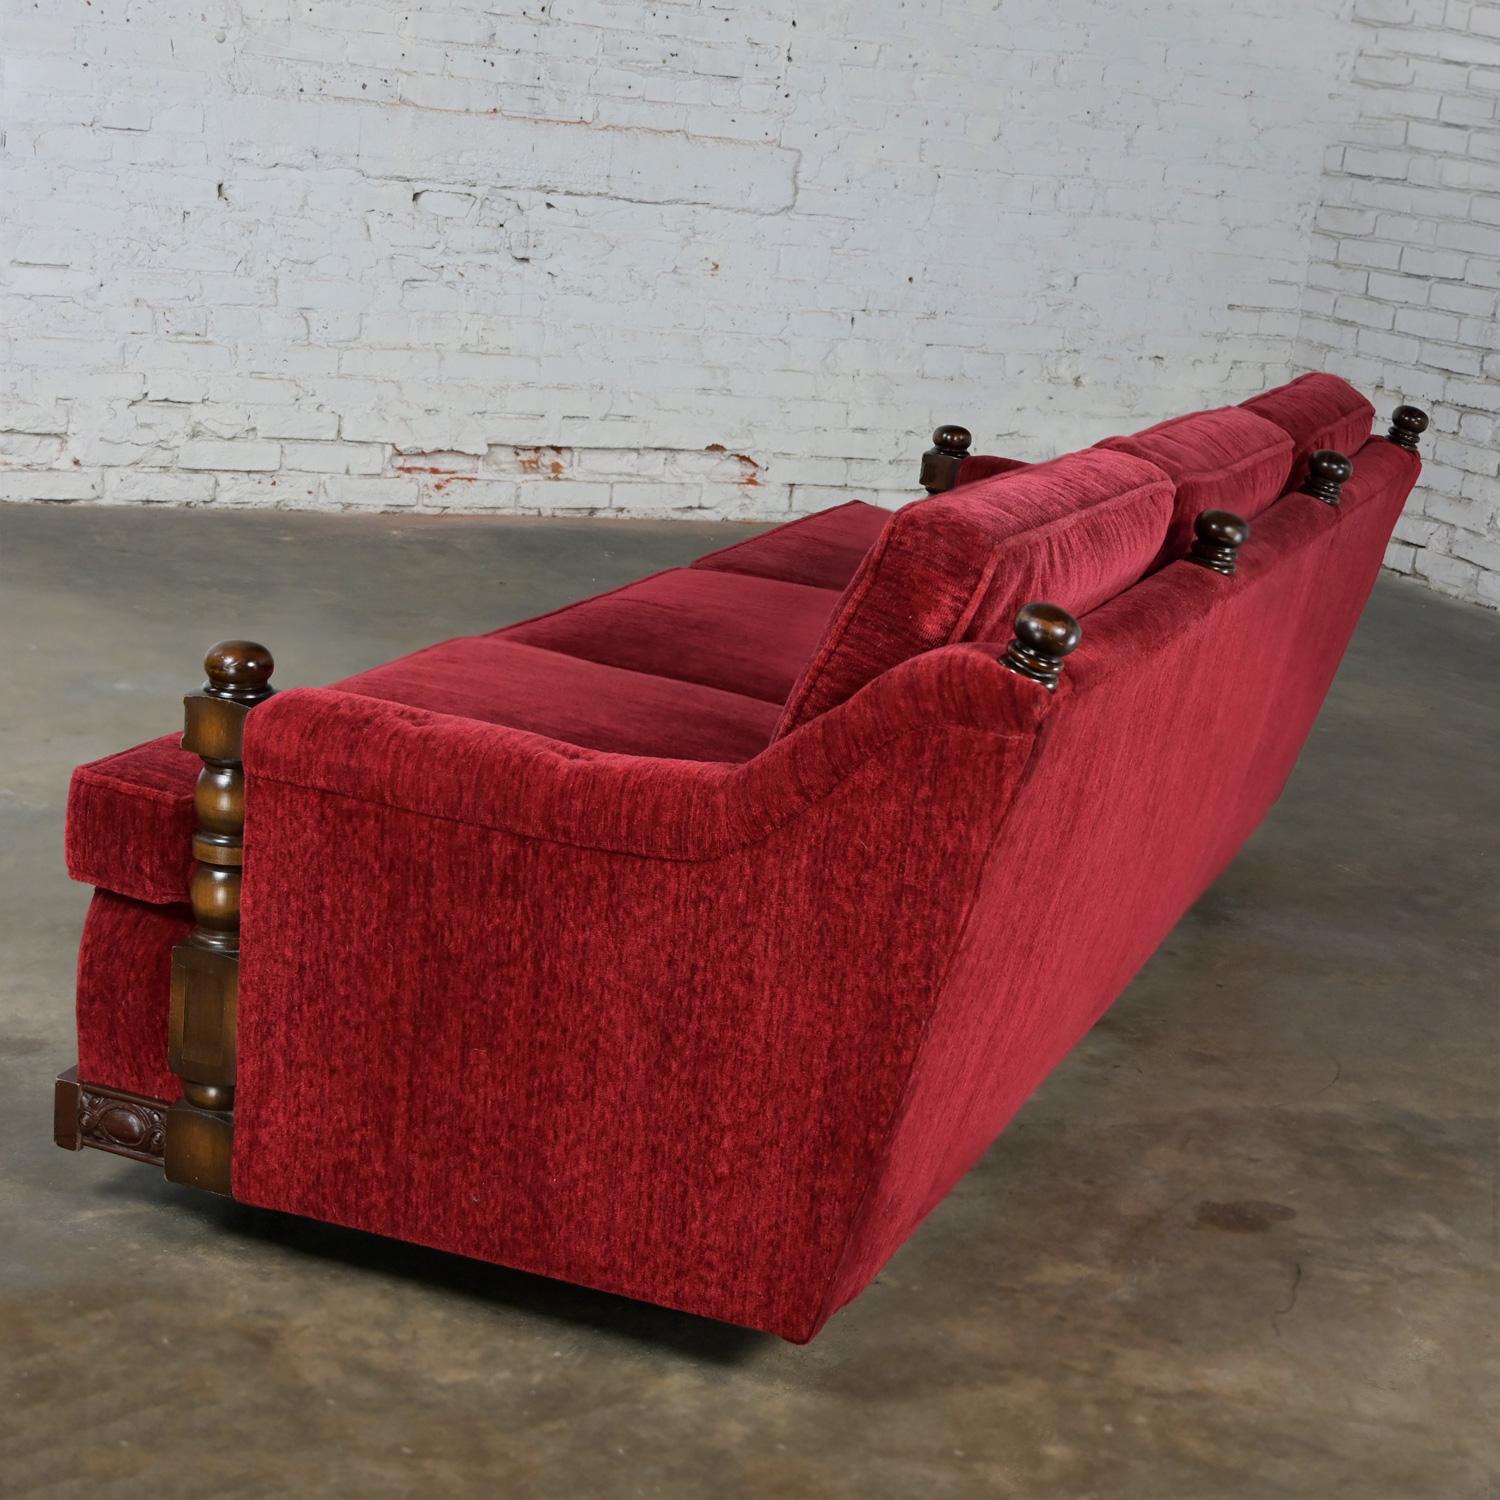 1970's Spanish Revival Rustic Red Chenille Sofa Style Artes De Mexico Internls In Good Condition For Sale In Topeka, KS